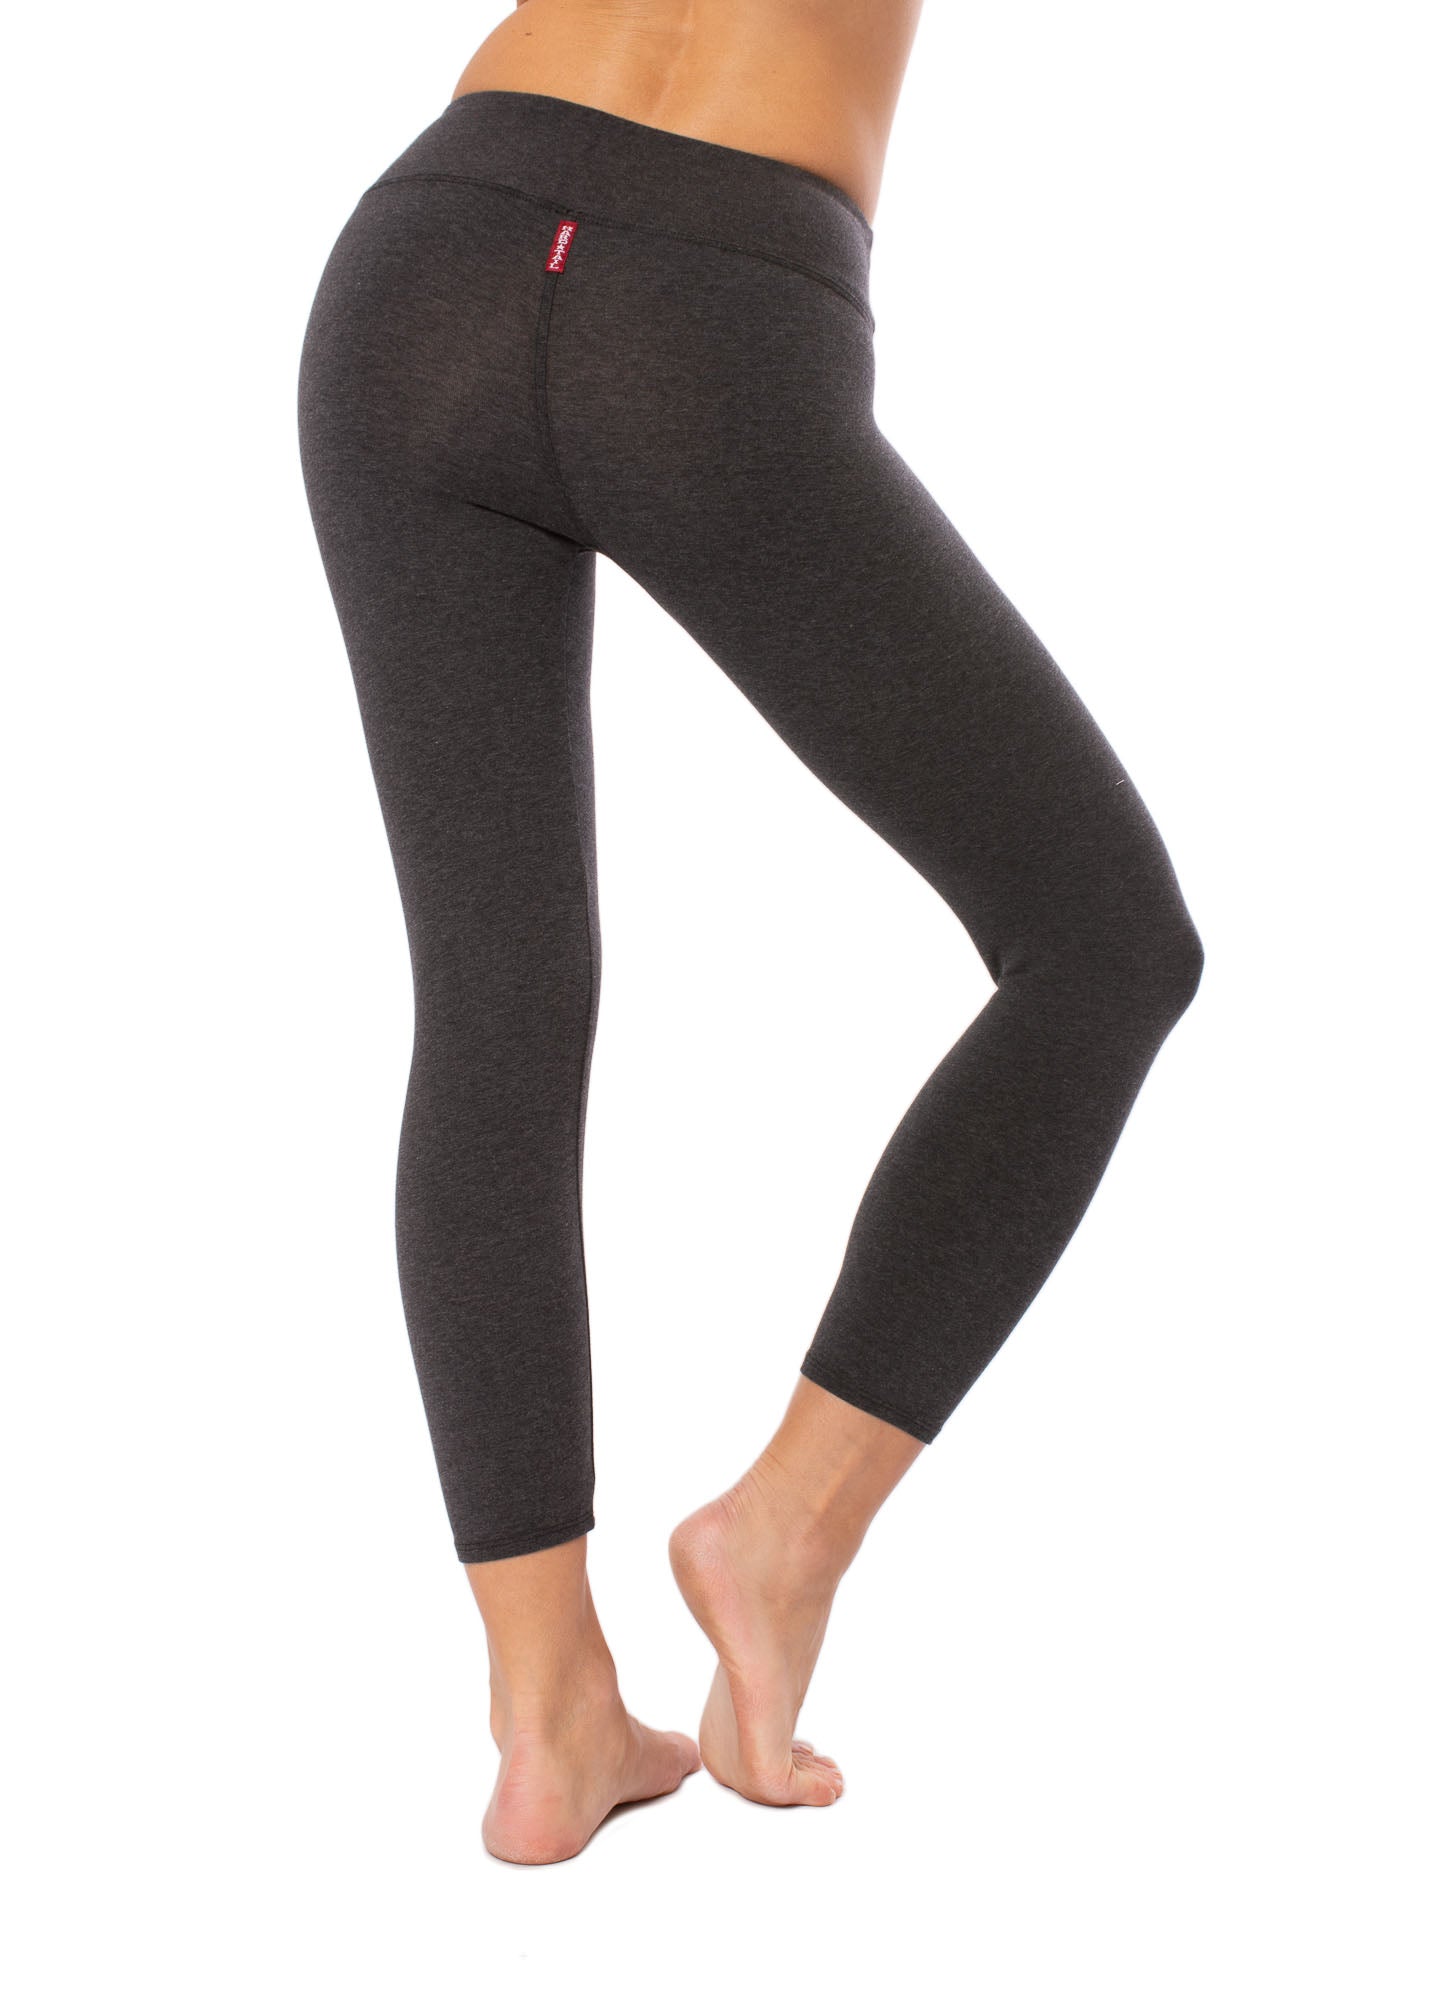 Roll Down Knee Legging (Style W-394, Dark Charcoal) by Hard Tail Forever